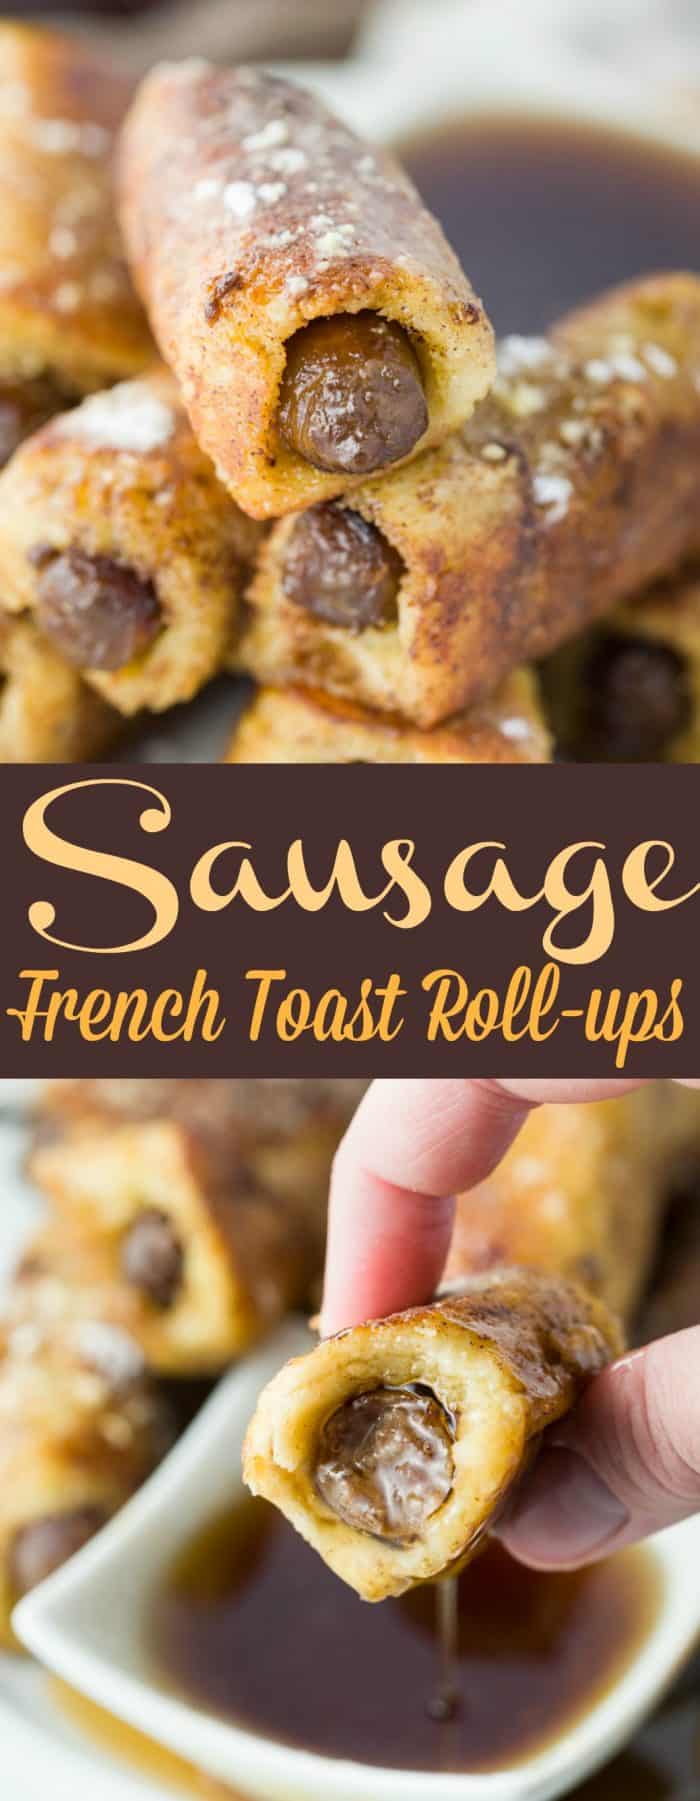 Warm, savory sausage wrapped in fresh bread that's dipped in a classic french toast mixture and cooked to golden-brown perfection. Served with syrup for dunking, this breakfast is perfect for both kids and adults! | The Cozy Cook | #sausage #frenchtoast #breakfast #brunch #holidays #holidaybrunch